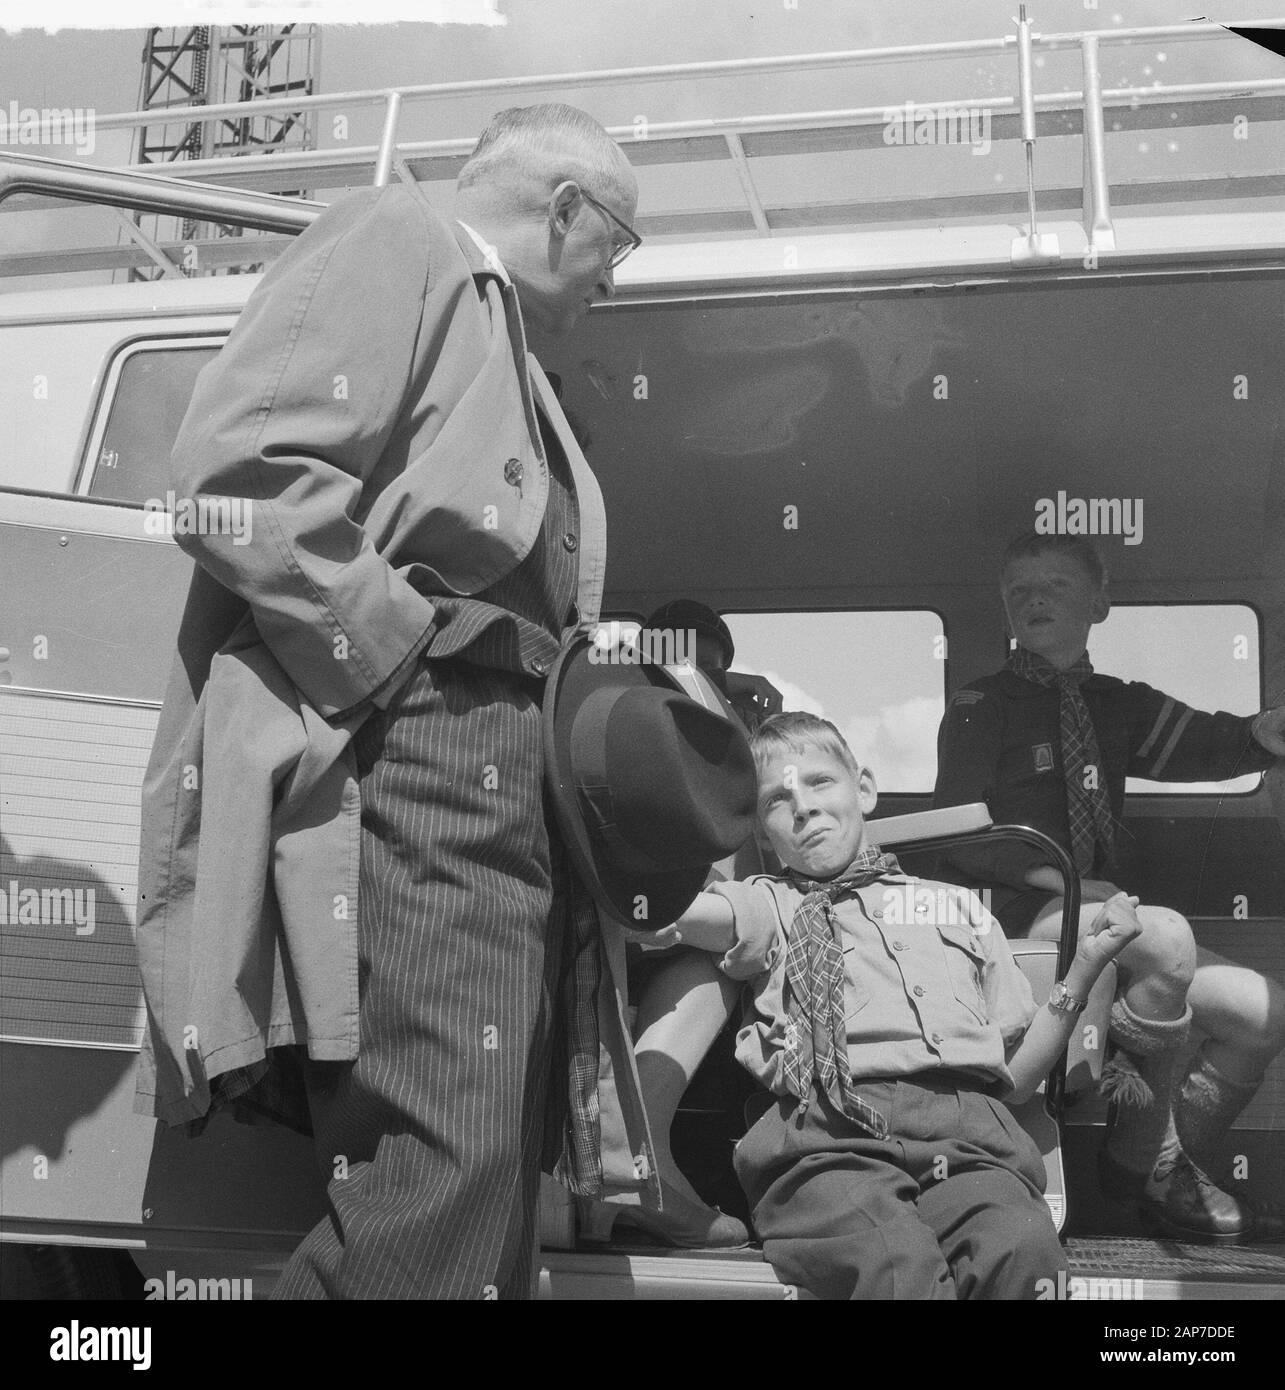 Building day Rotterdam 1961 Description: Mayor of Walsum in conversation with a Boy Scout Date: May 18, 1961 Location: Rotterdam, Zuid-Holland Keywords: conversations, Boy Scouts Personal name: Walsum, van Gerard Stock Photo